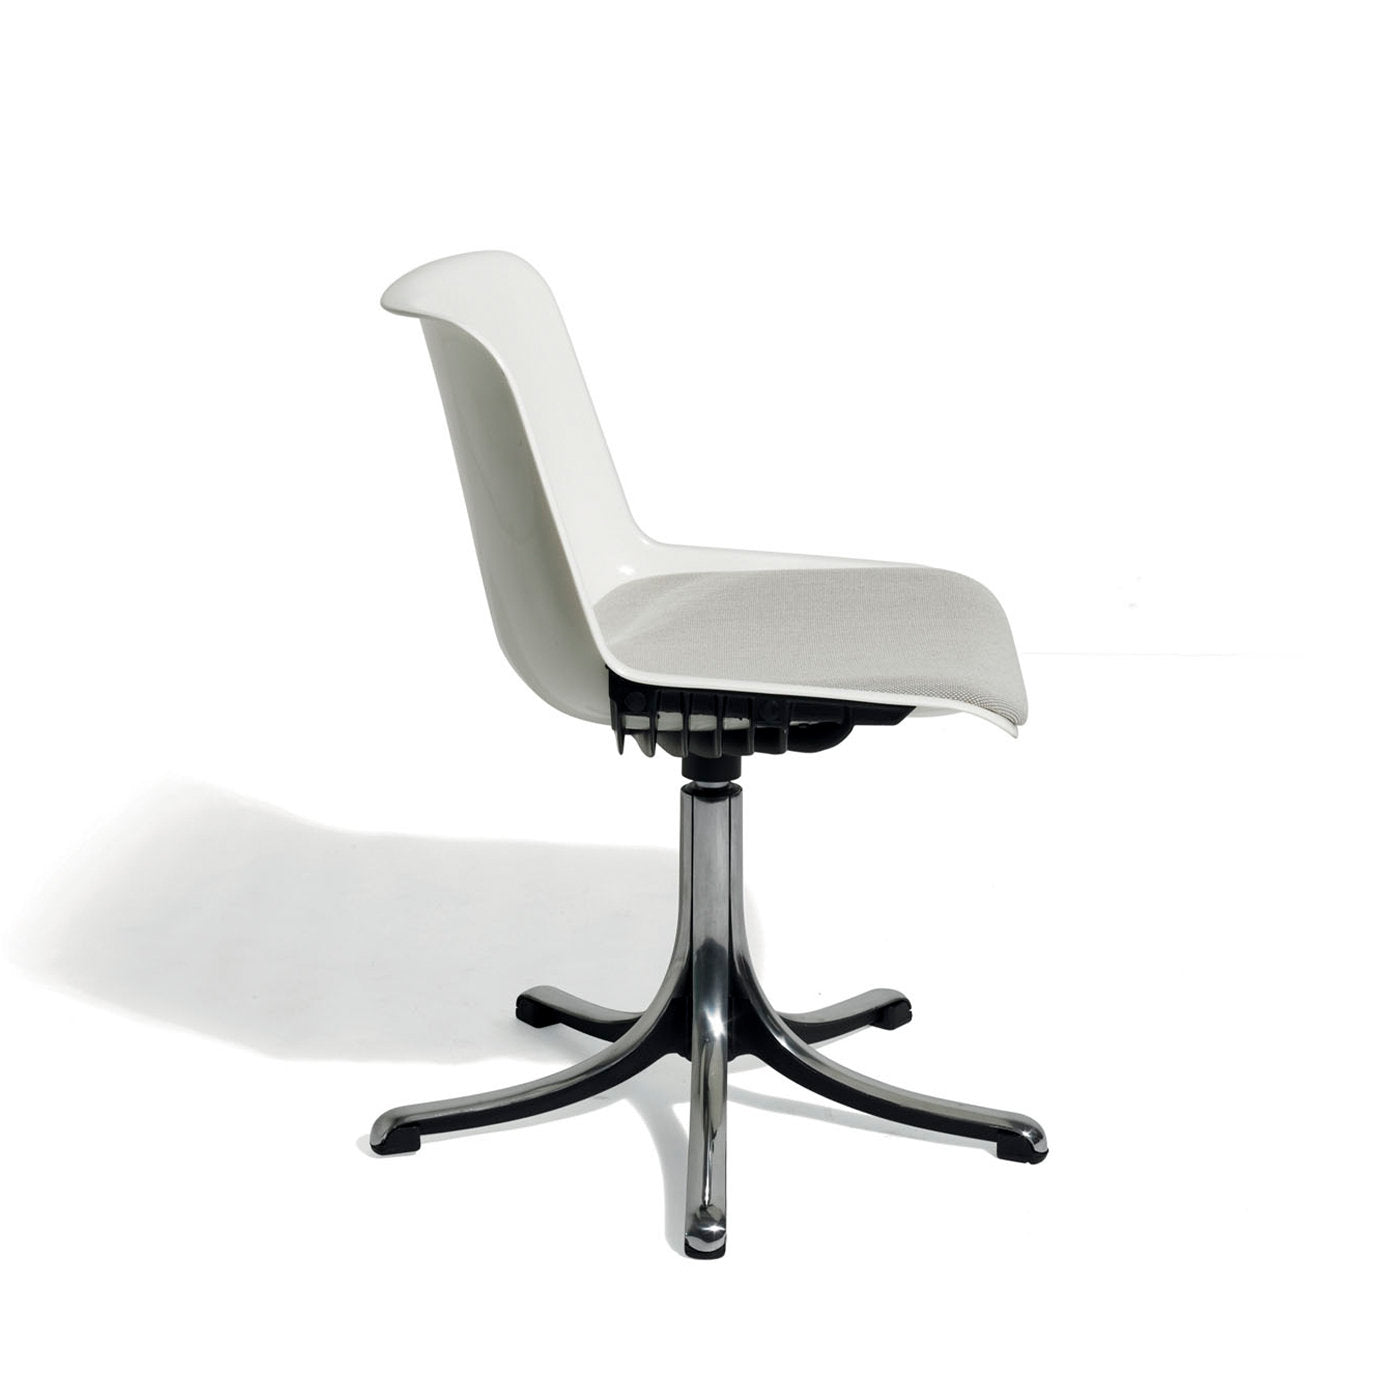 Modus White Chair with Gray Seat Cushion by Centro Progetti Tecno - Alternative view 2